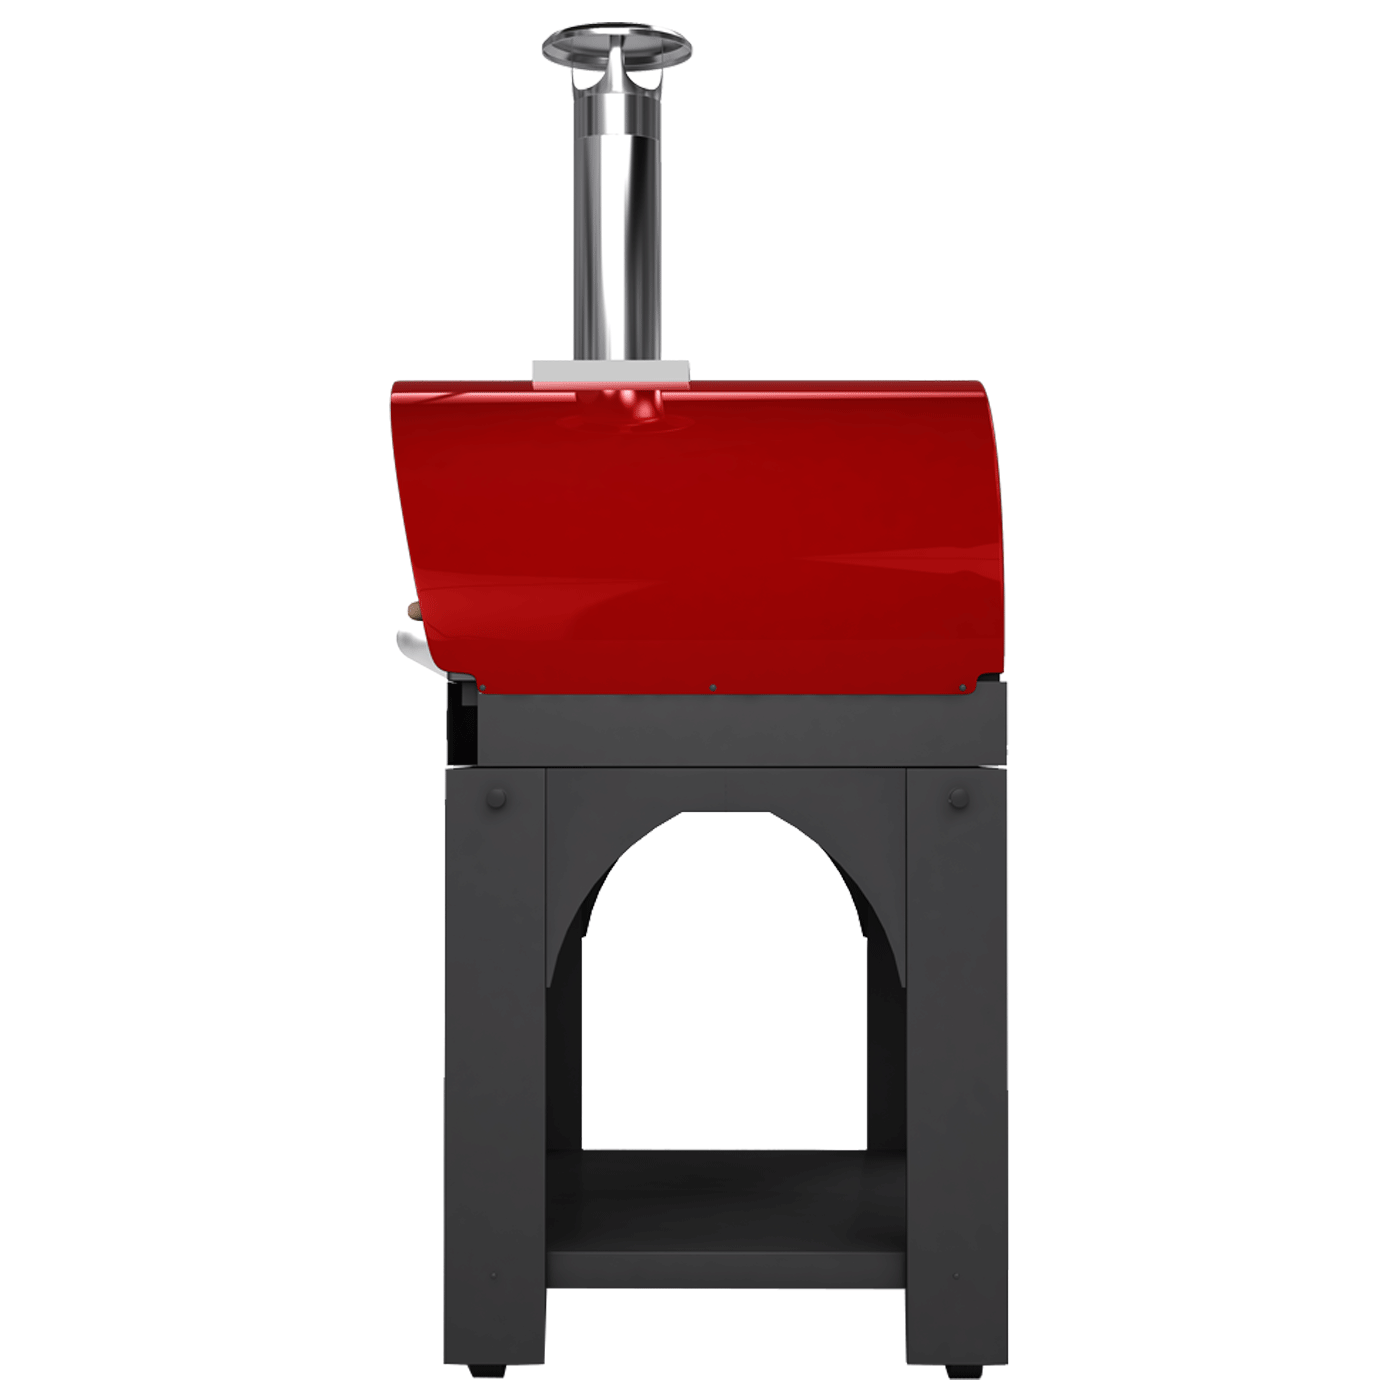 Belforno Medio Portable Gas-Fired Pizza Oven - Kitchen King Direct